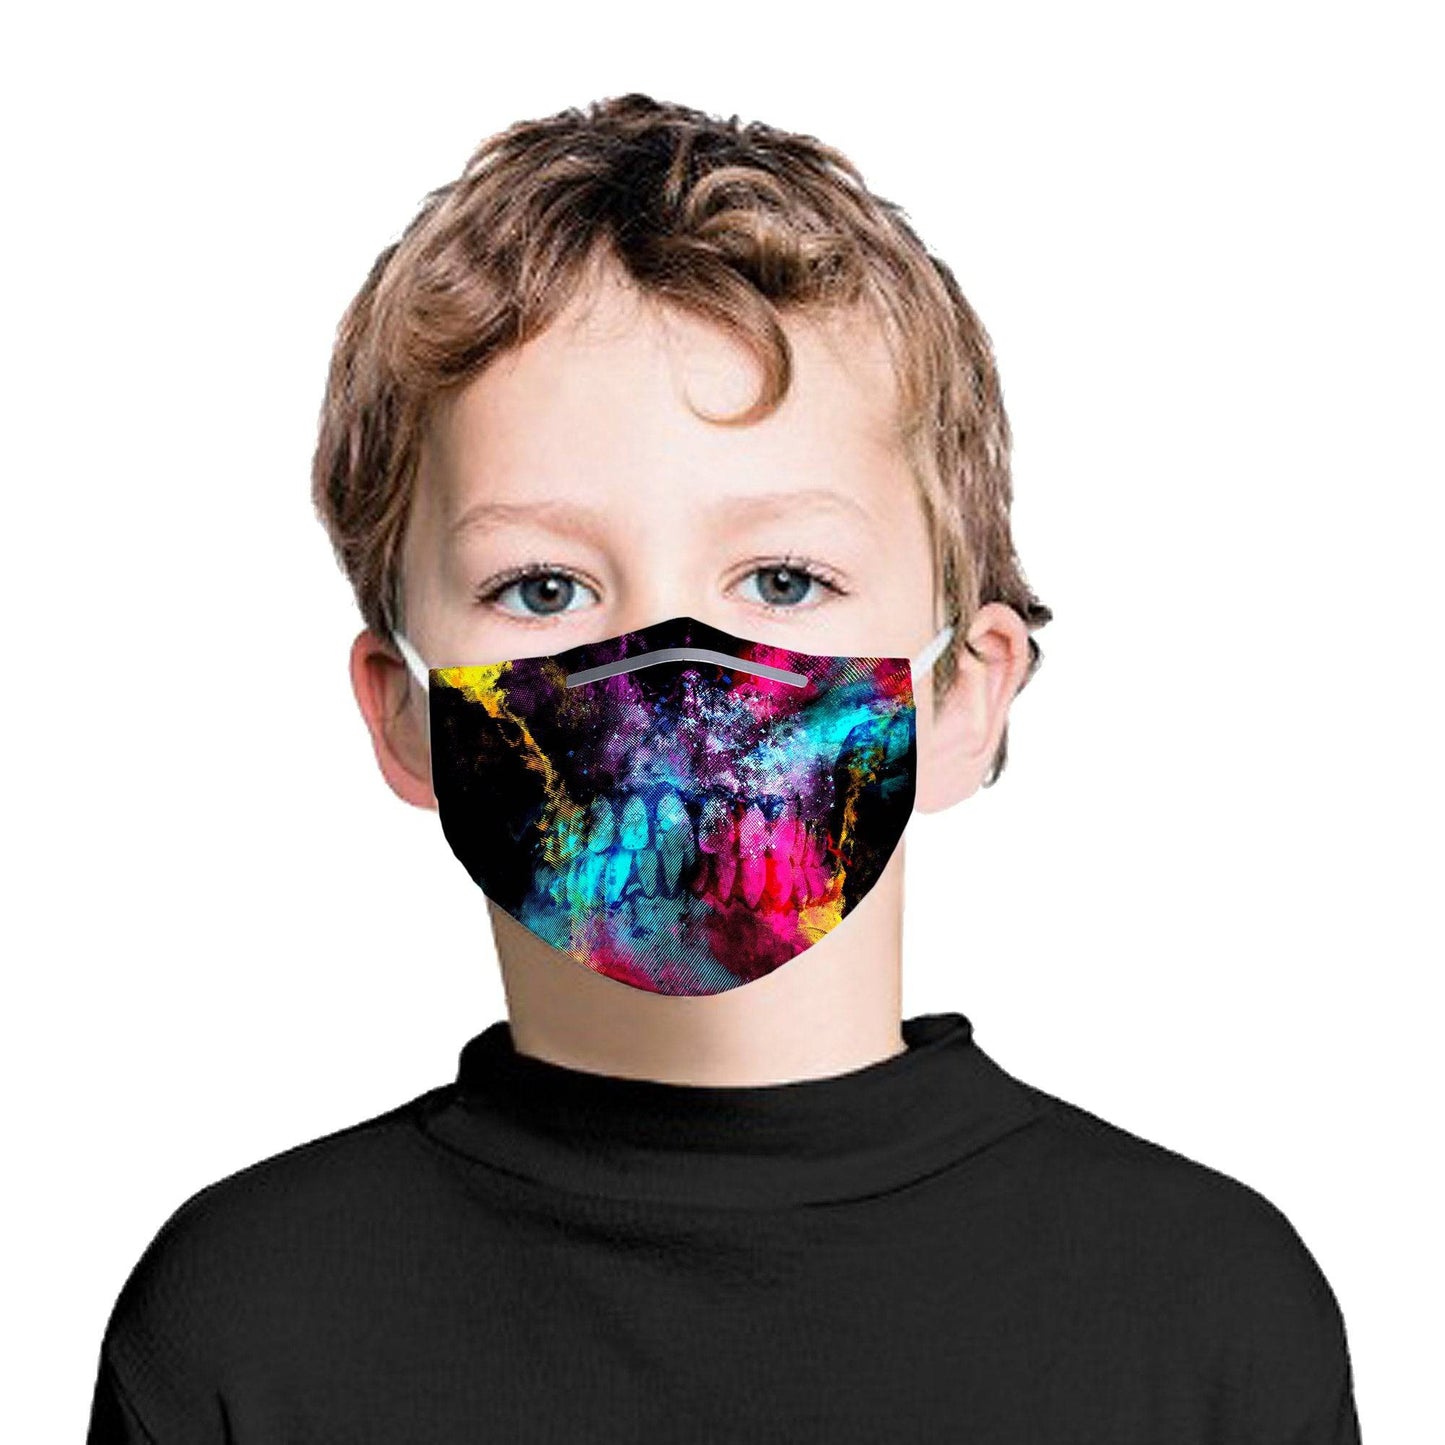 Skull 49 Kids Face Mask With (4) PM 2.5 Carbon Inserts, Riza Peker, | iEDM